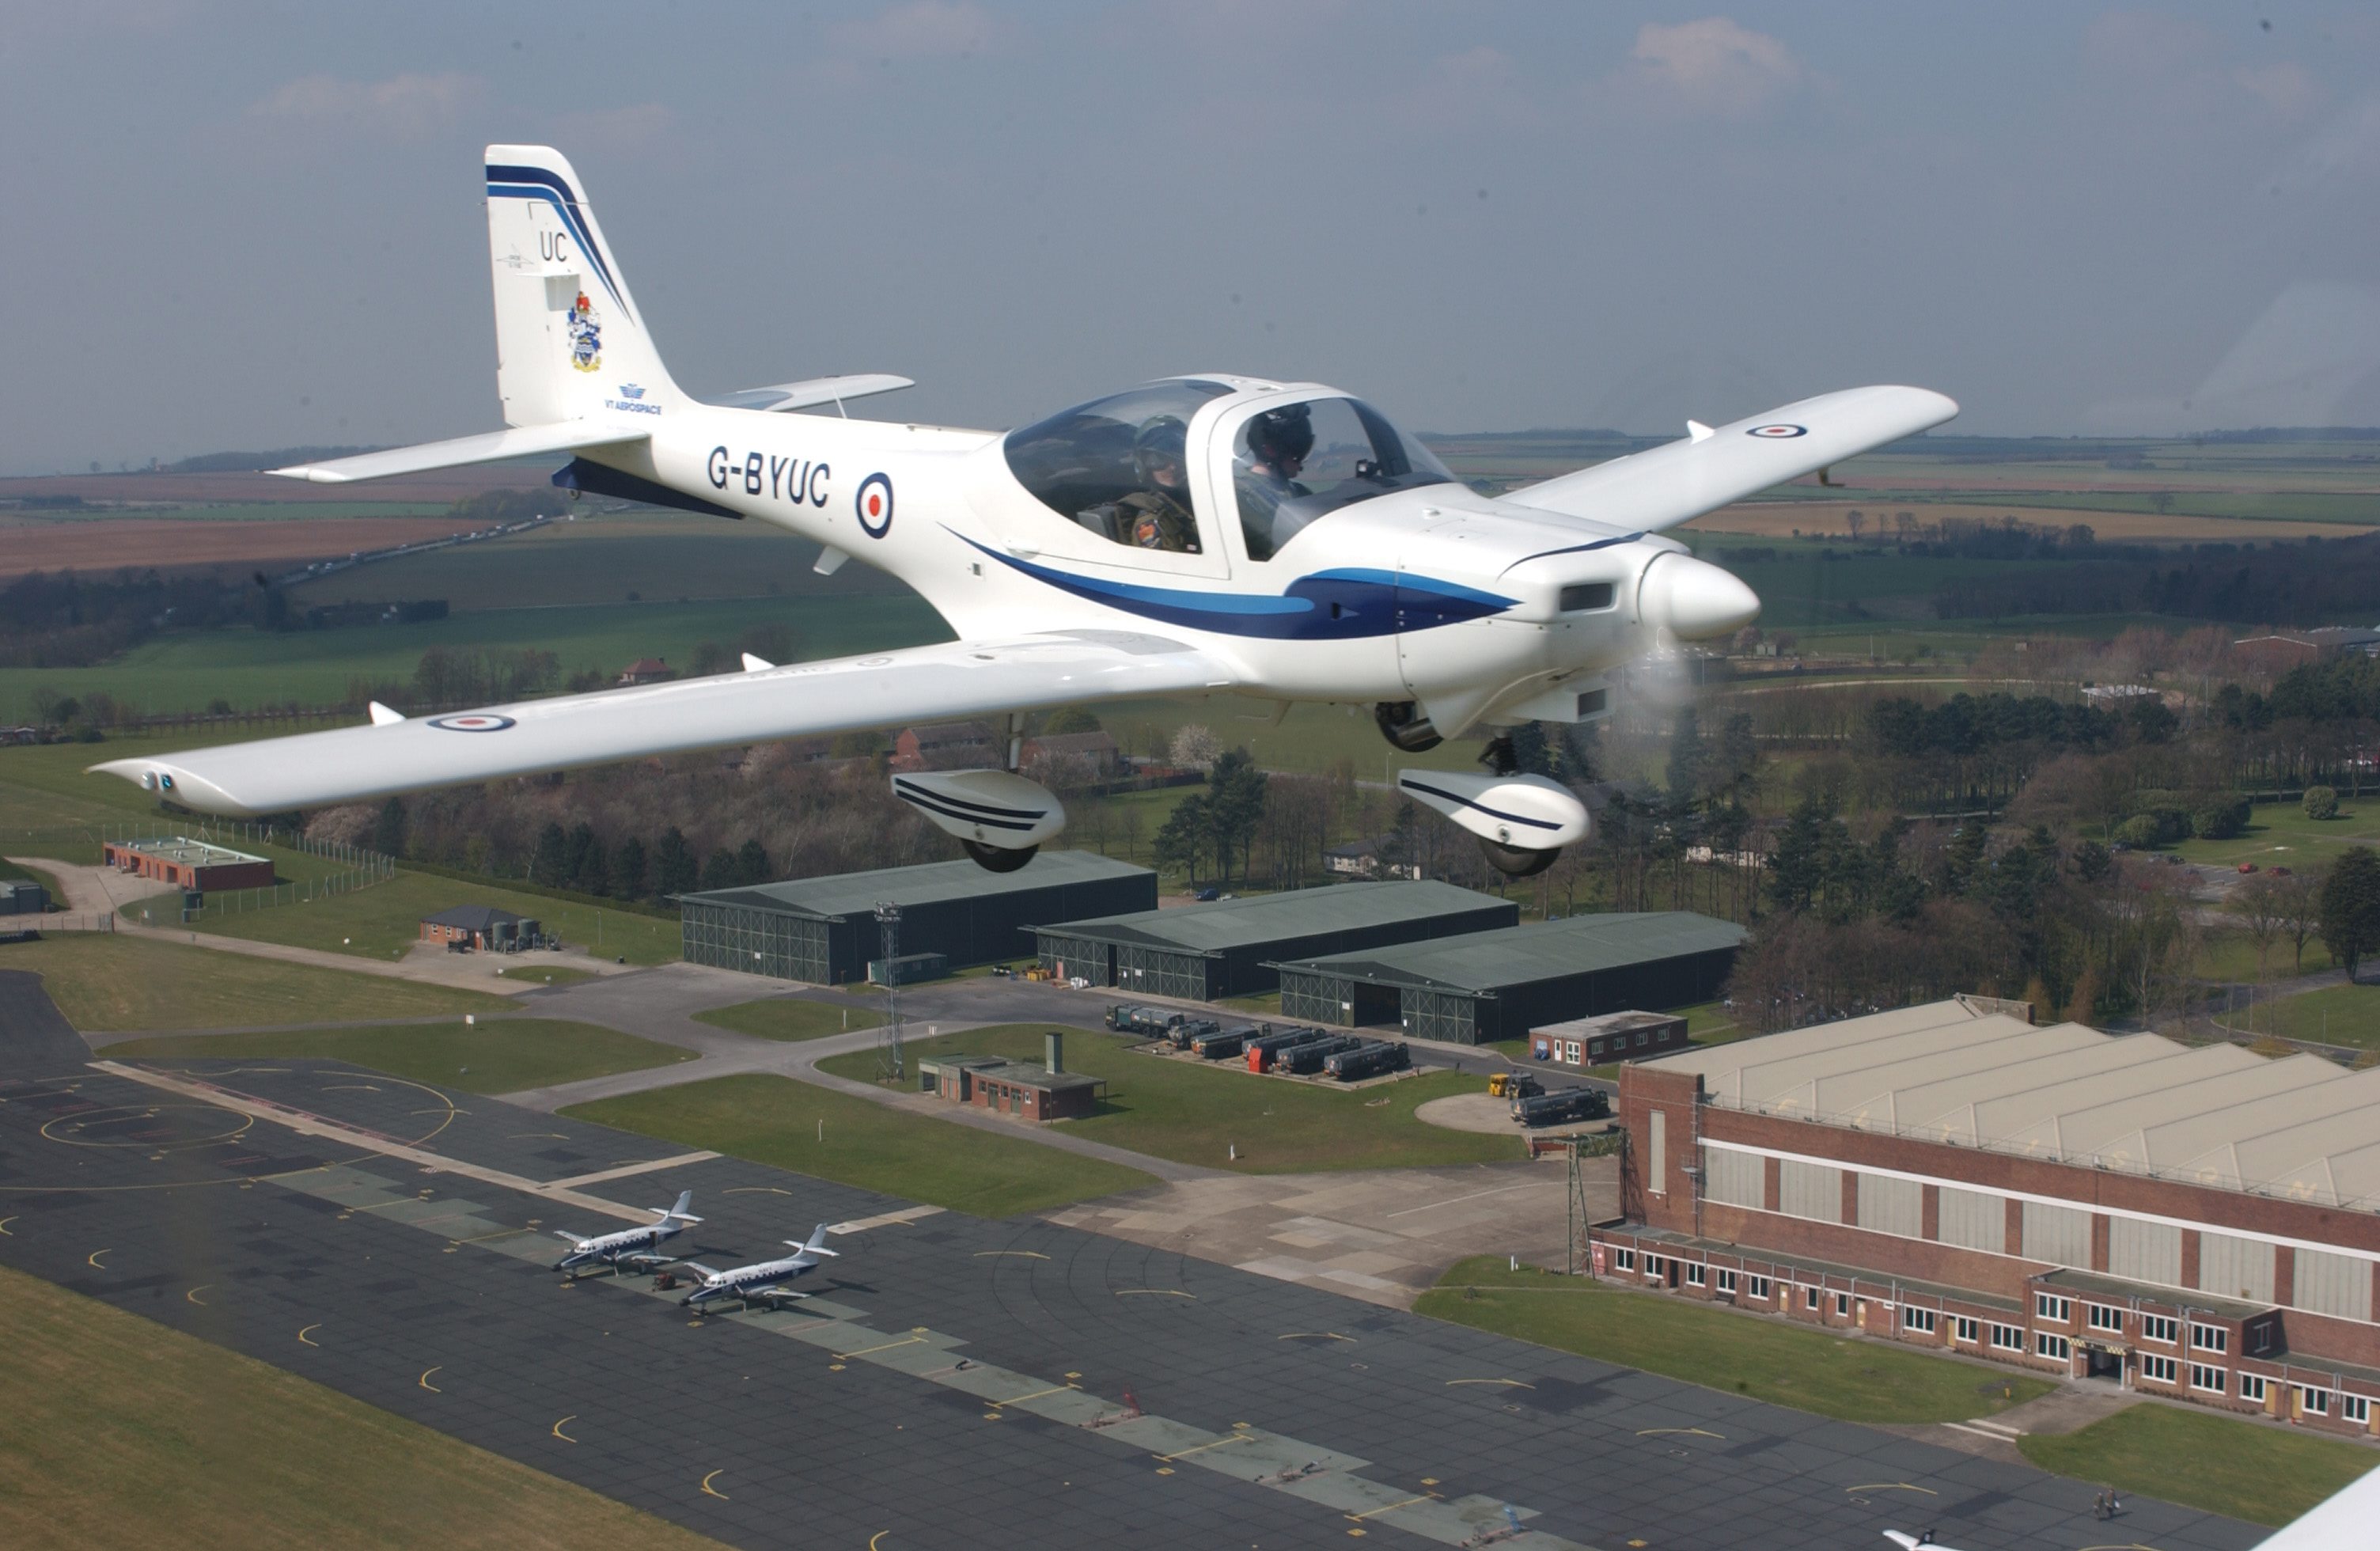 A Royal Air Force Grob Tutor photographed over Lincolnshire.